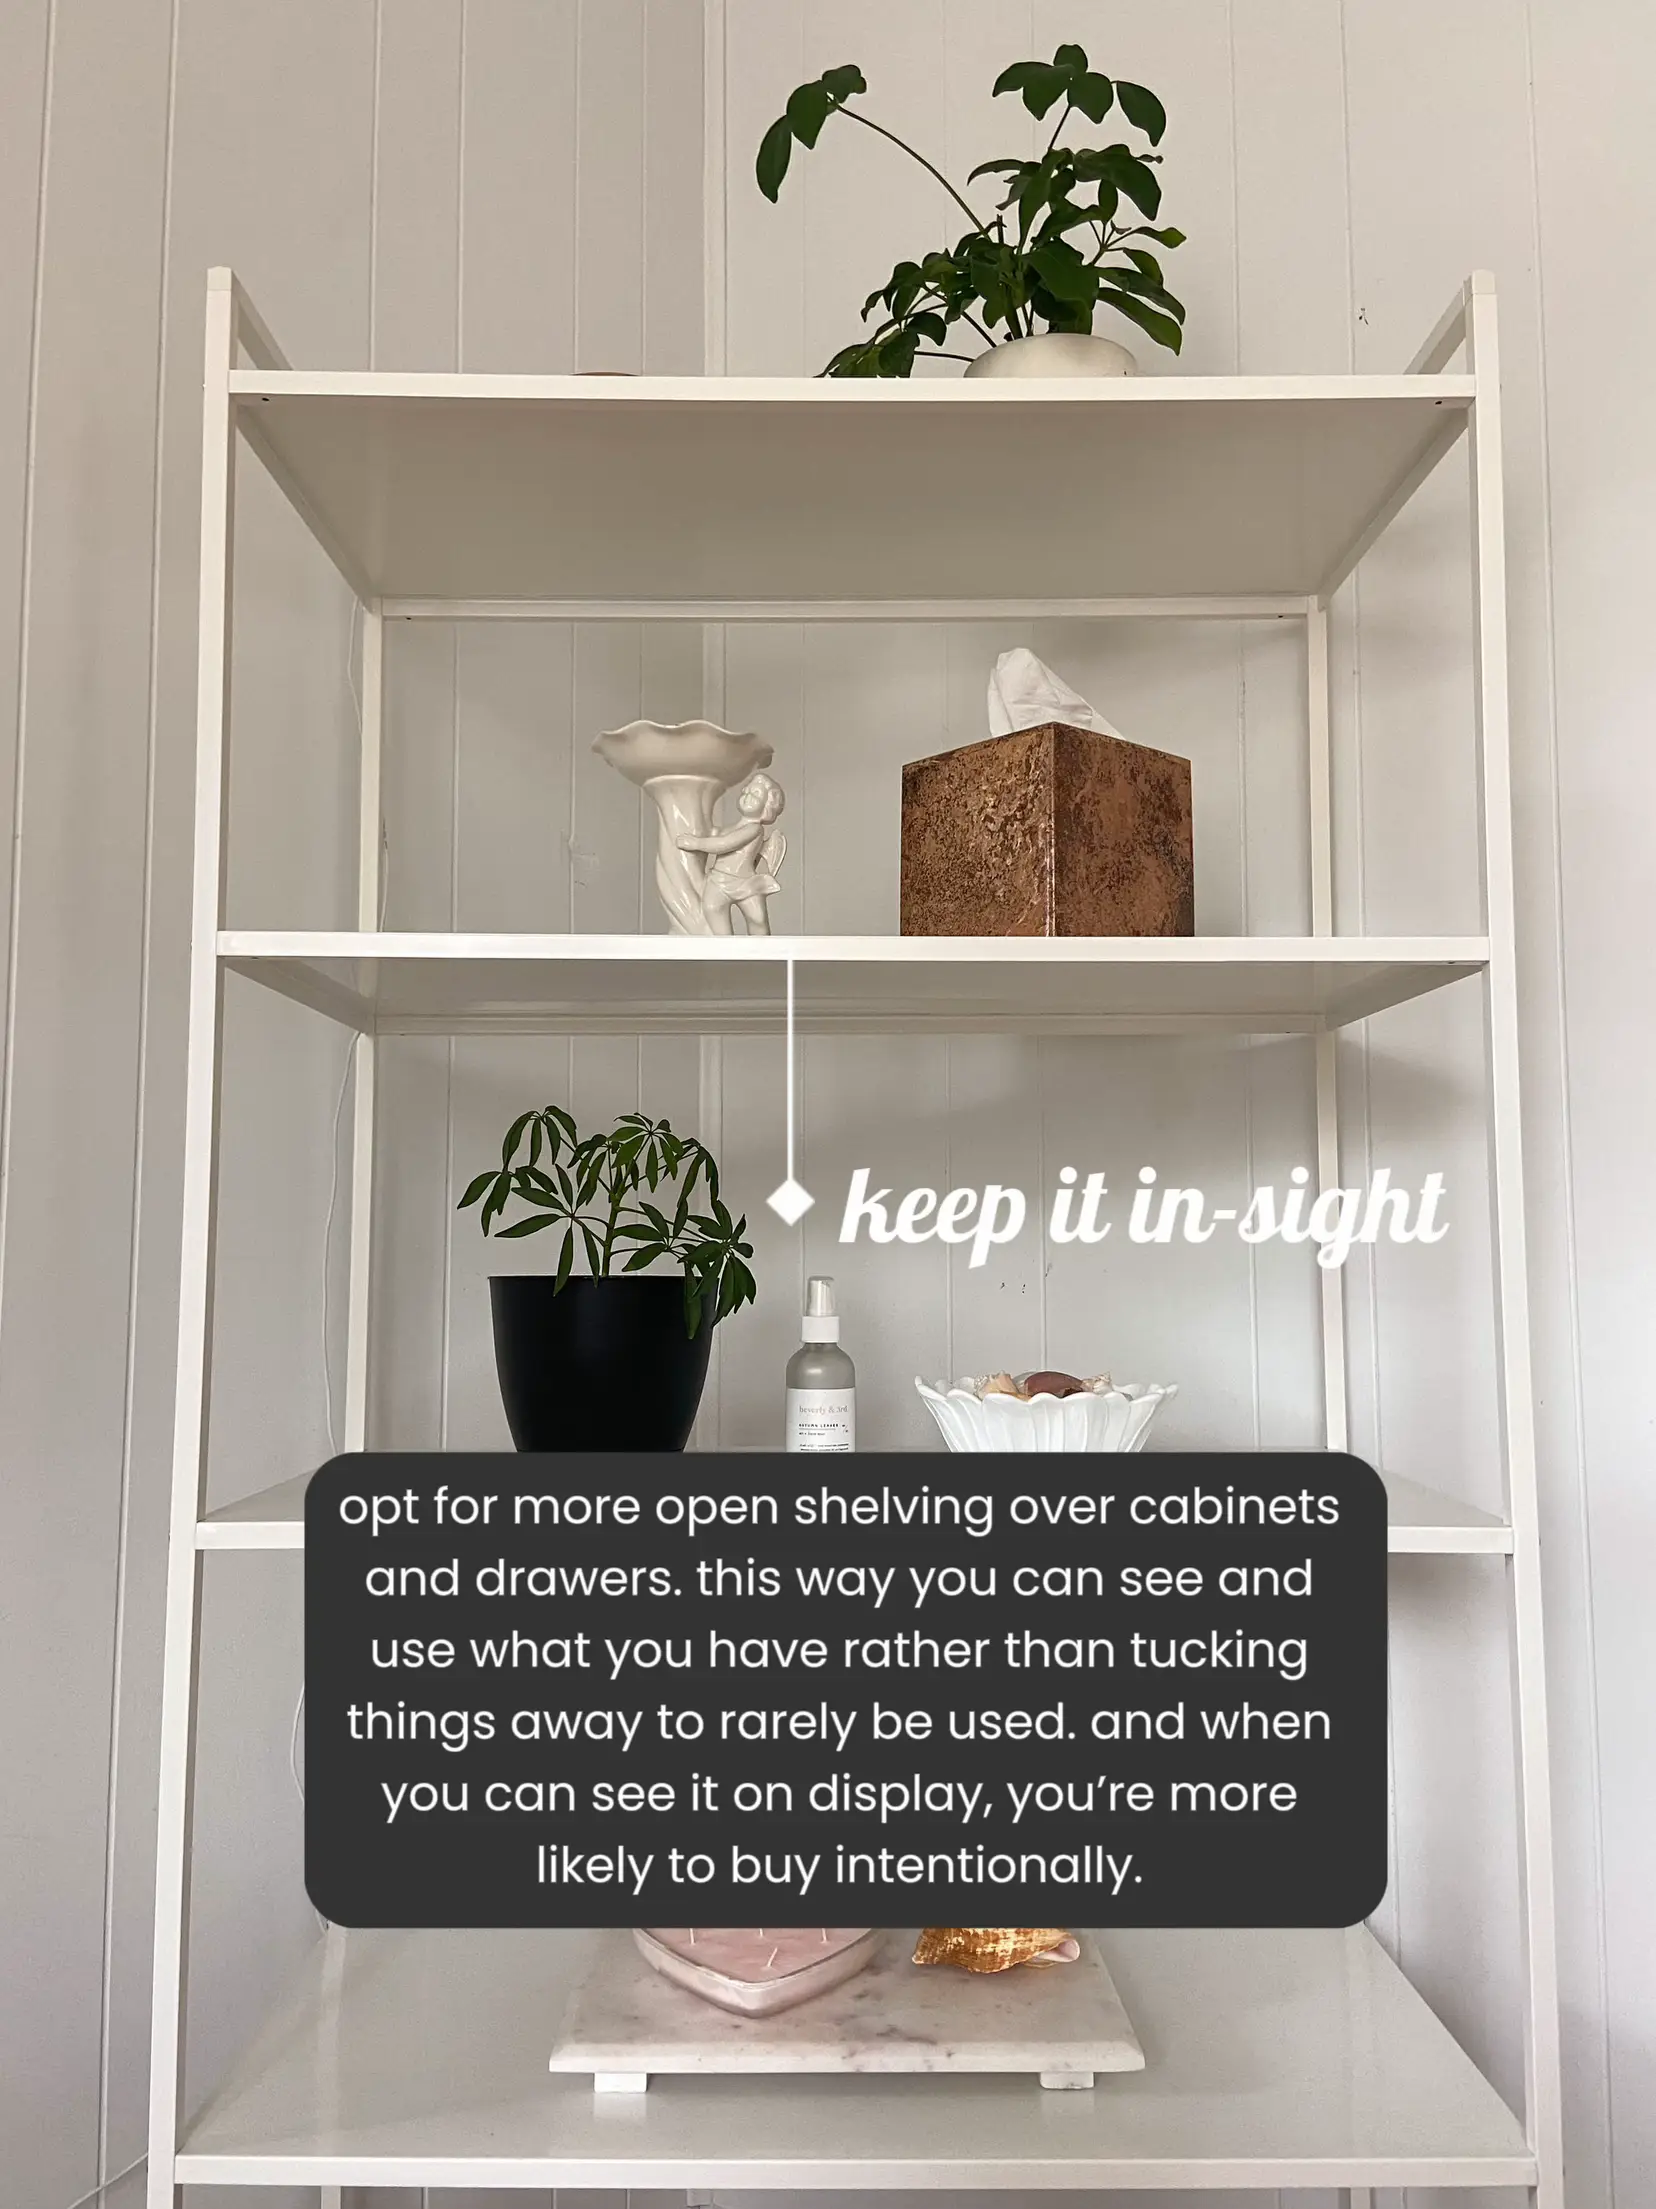  Interiors & Lifestyle by Laura López: HOW TO ORGANIZE YOUR  FRIDGE IN A MORE ECOLOGICAL WAY (WITH IKEA STORAGE)